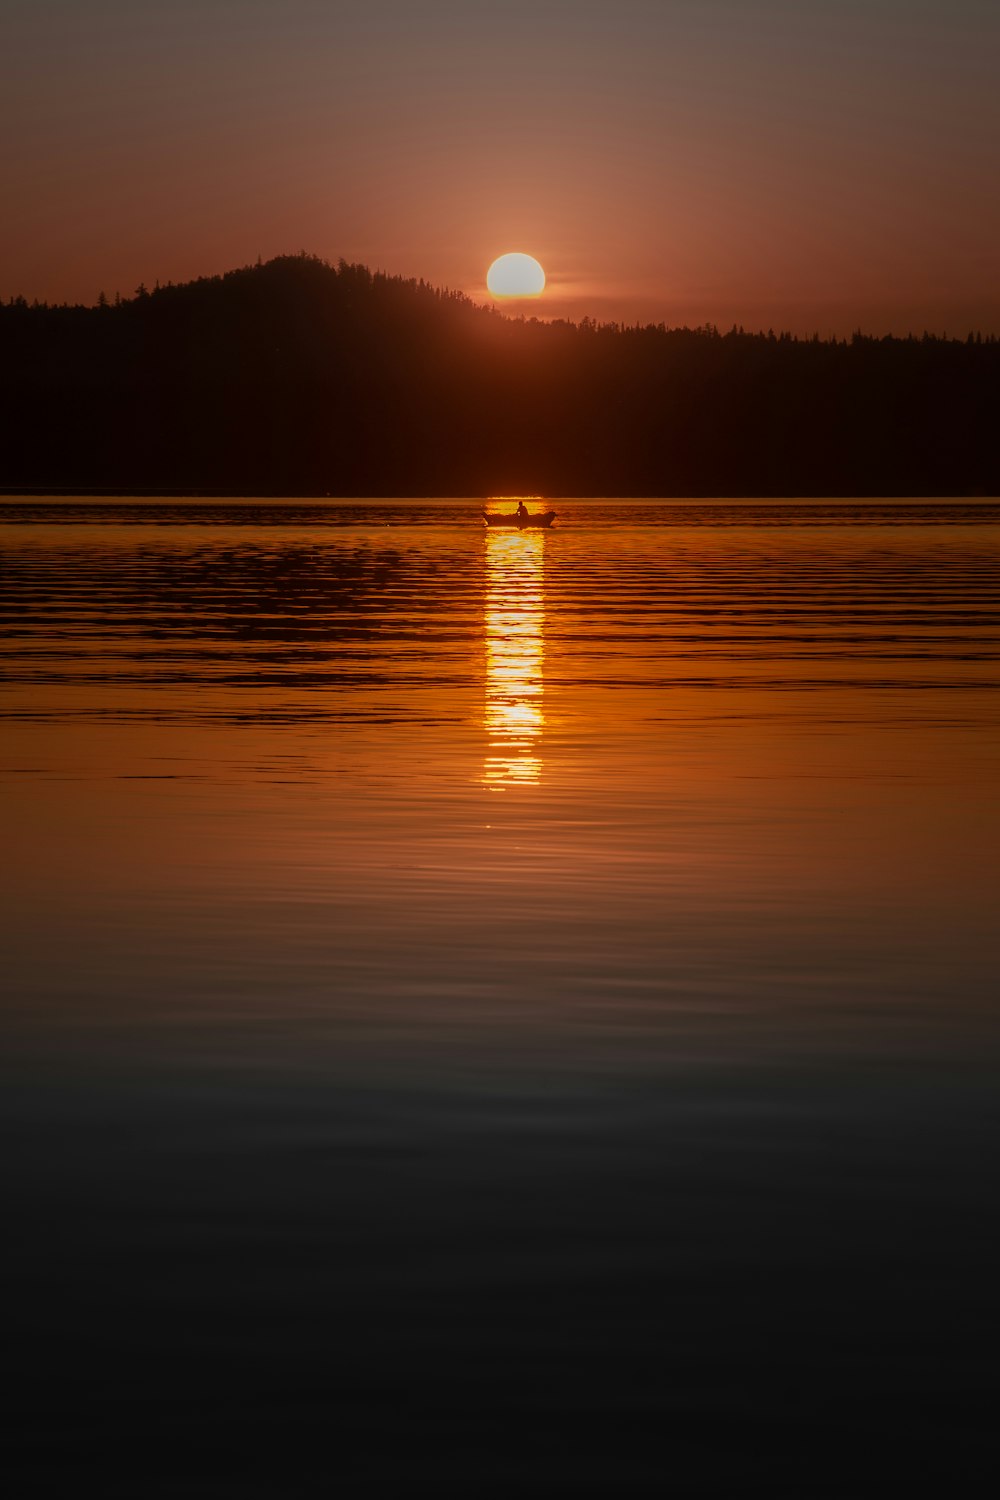 the sun setting over a lake with a boat in the water